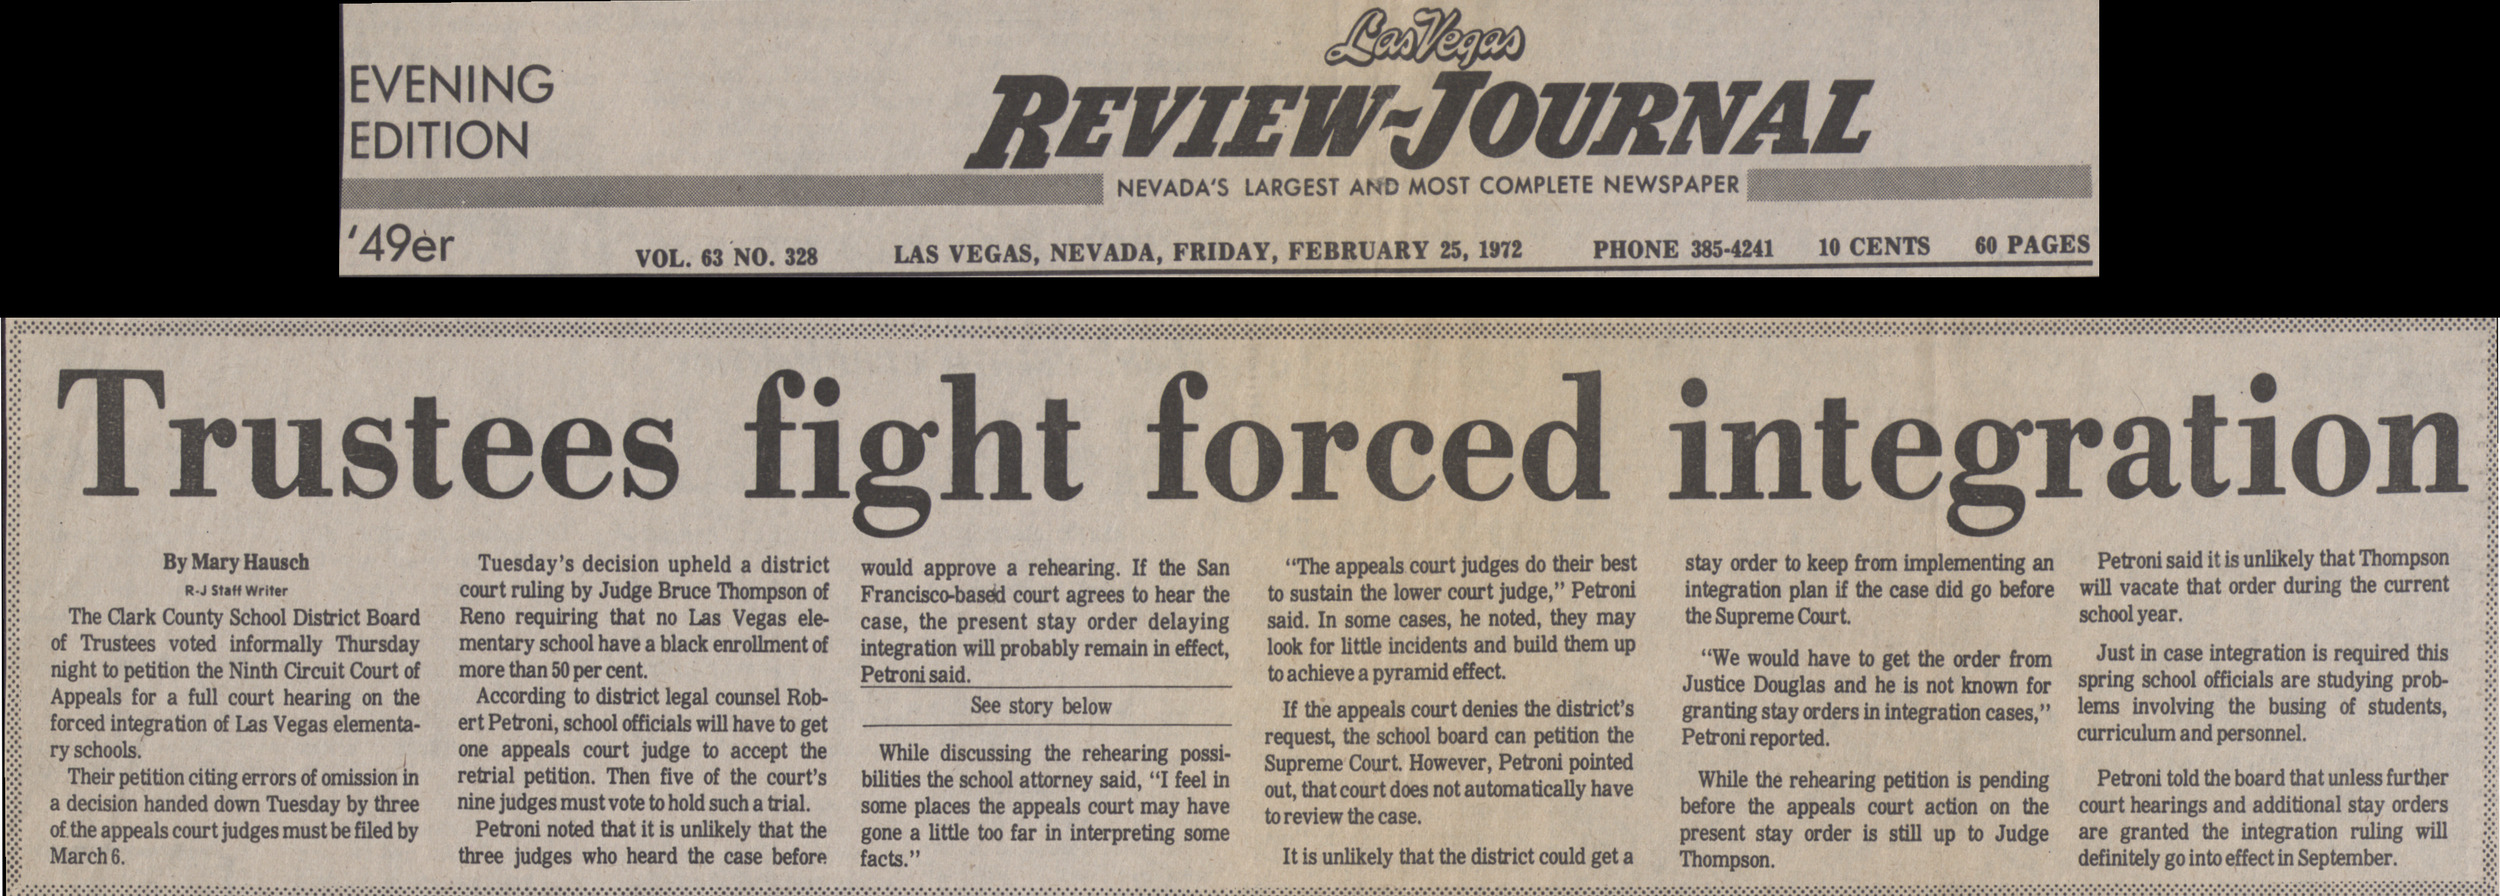 Newspaper clipping, Trustees fight forced integration, Las Vegas Review-Journal, February 25, 1972